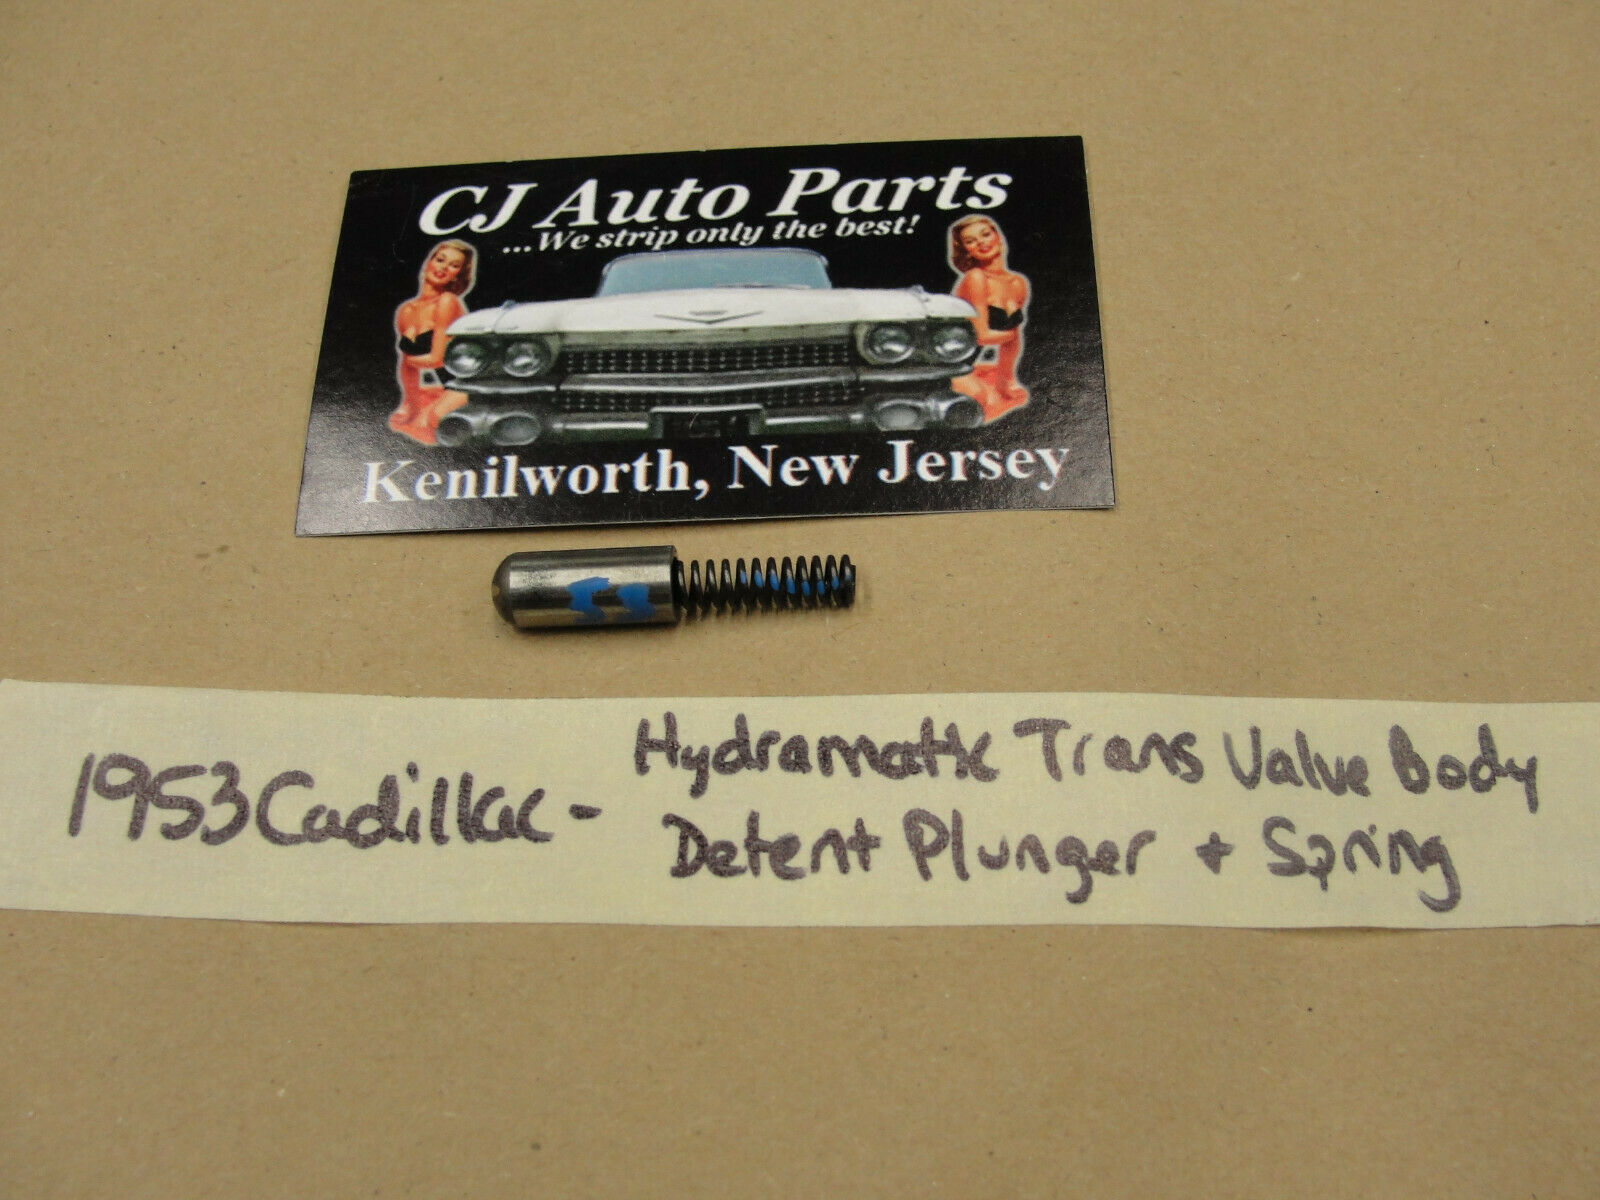 53 Cadillac HYDRAMATIC TRANSMISSION VALVE BODY SHIFT LEVER DETENT PLUNGER SPRING - $29.69